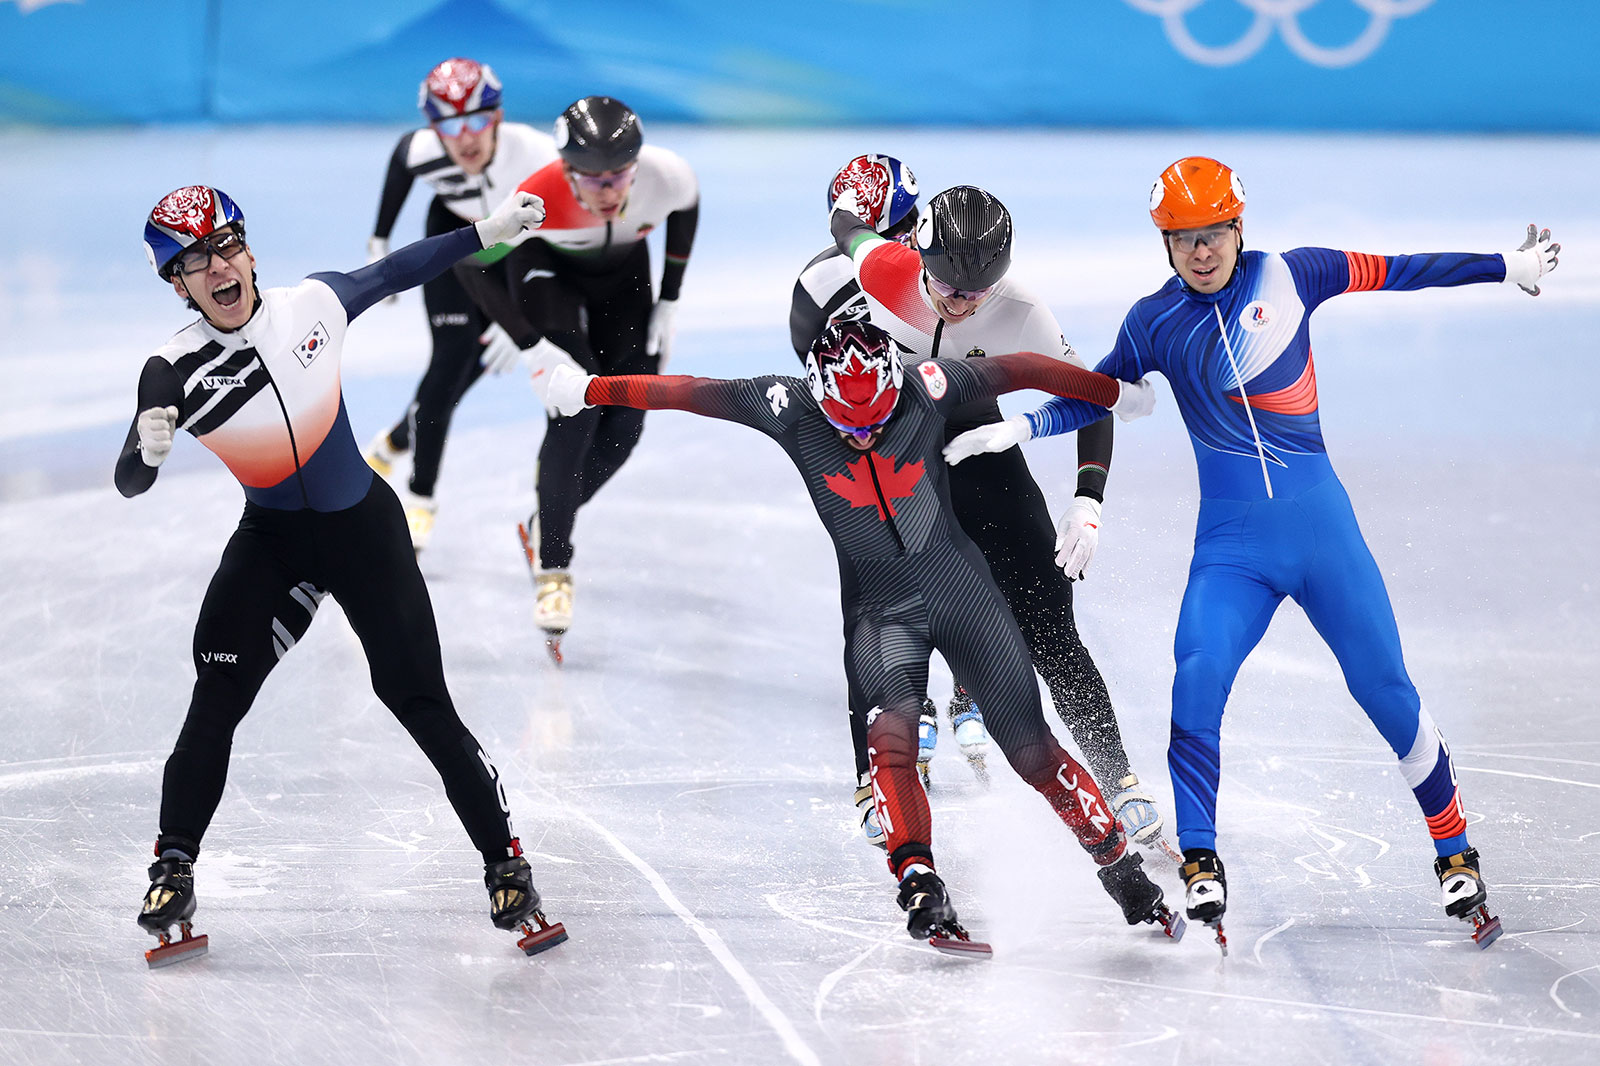 From left, South Korean speed skater Hwang Dae-heon crosses the finish line ahead of Canada's Steven Dubois and the ROC's Semen Elistratov to win the men's 1,500m short track final on February 9.